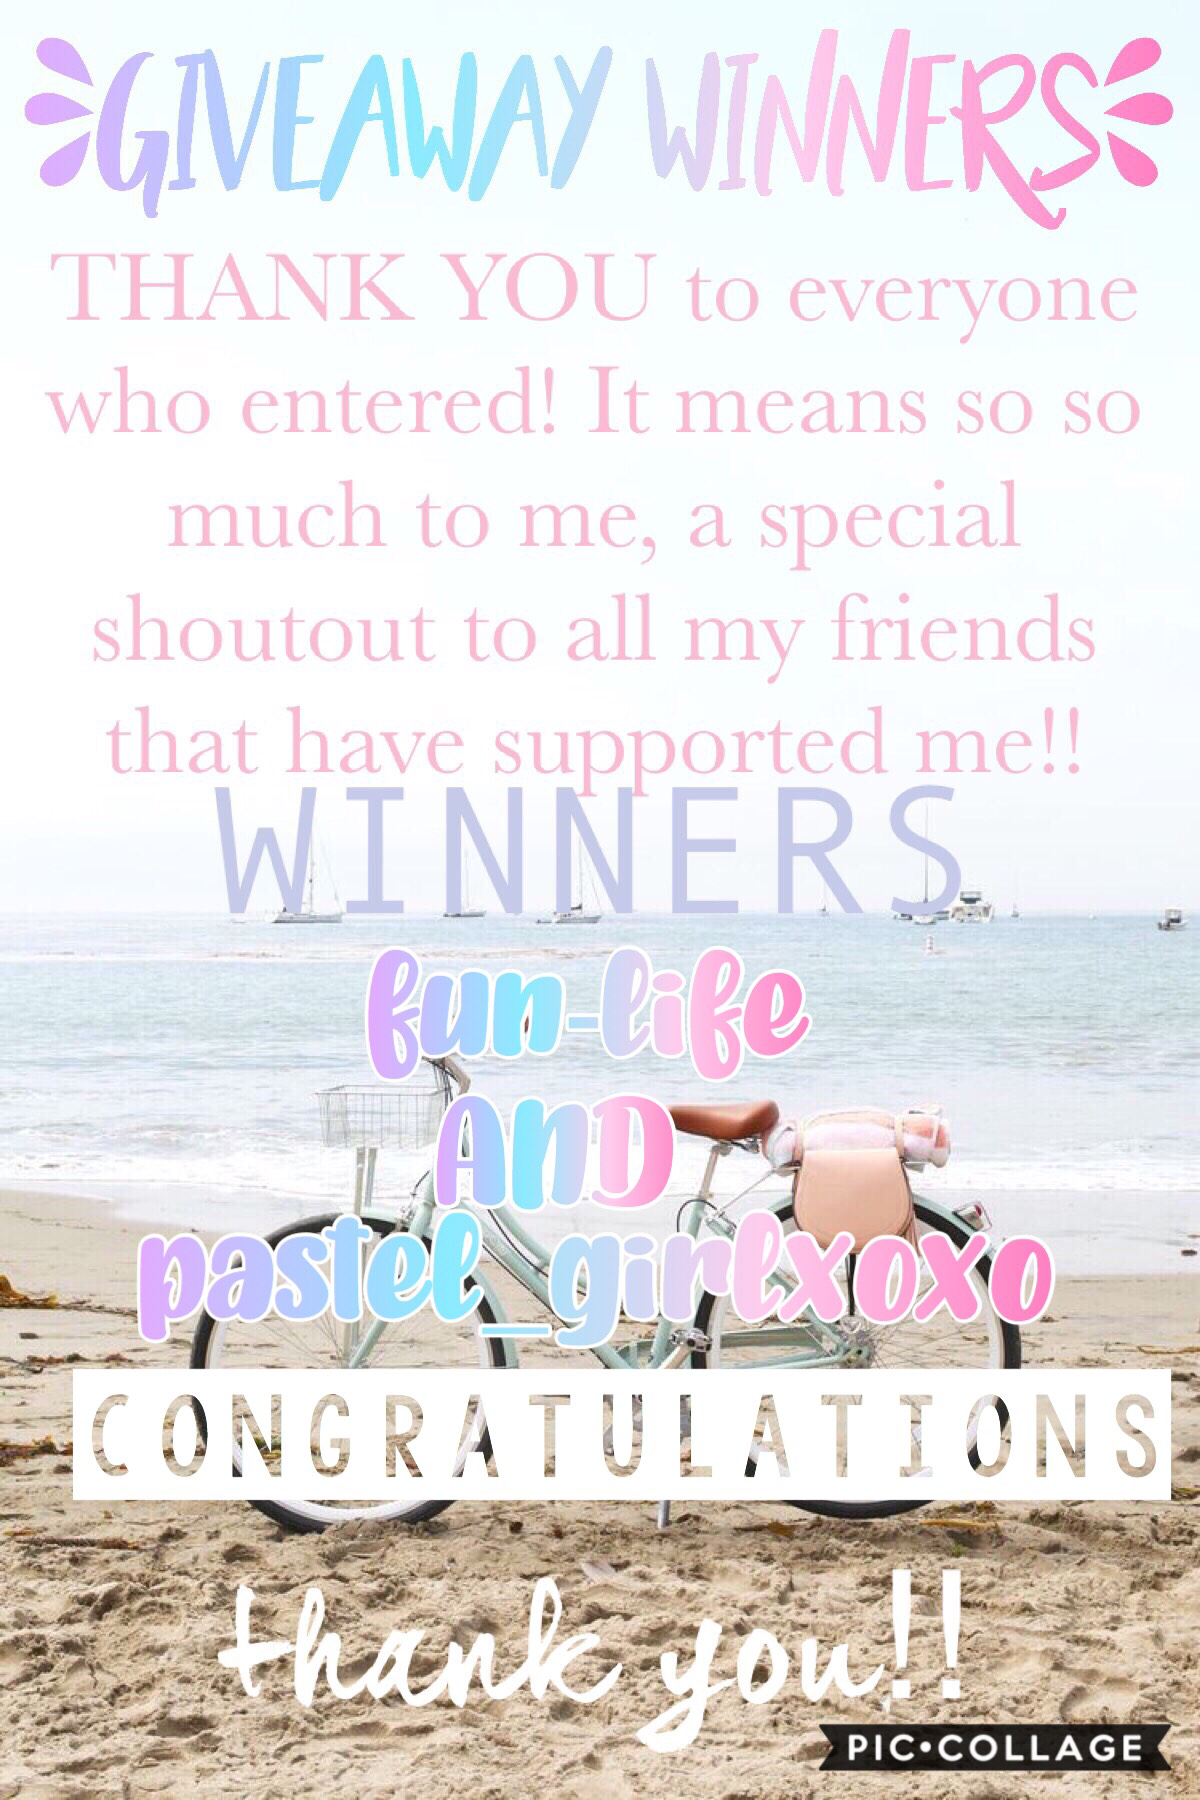 GIVEAWAY WINNERS!! Thank you so much to everyone who entered!! Means the world to me! But unfortunately there could only be 2 winners! So congratulations to fun-life and pastel_girlxoxo, check remix for prizes, will prob give them out tomorrow cuz I need 